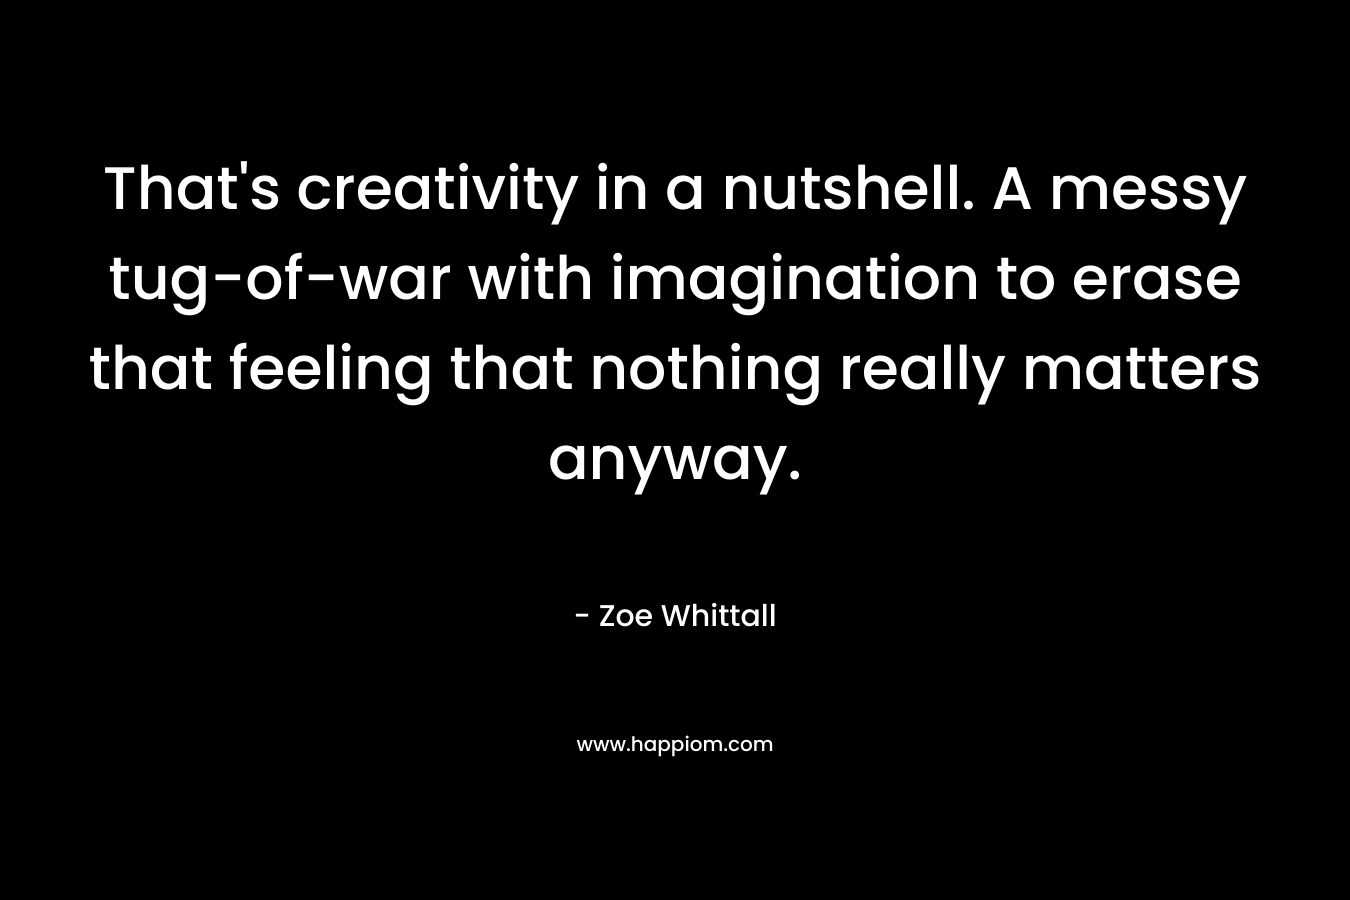 That’s creativity in a nutshell. A messy tug-of-war with imagination to erase that feeling that nothing really matters anyway. – Zoe Whittall